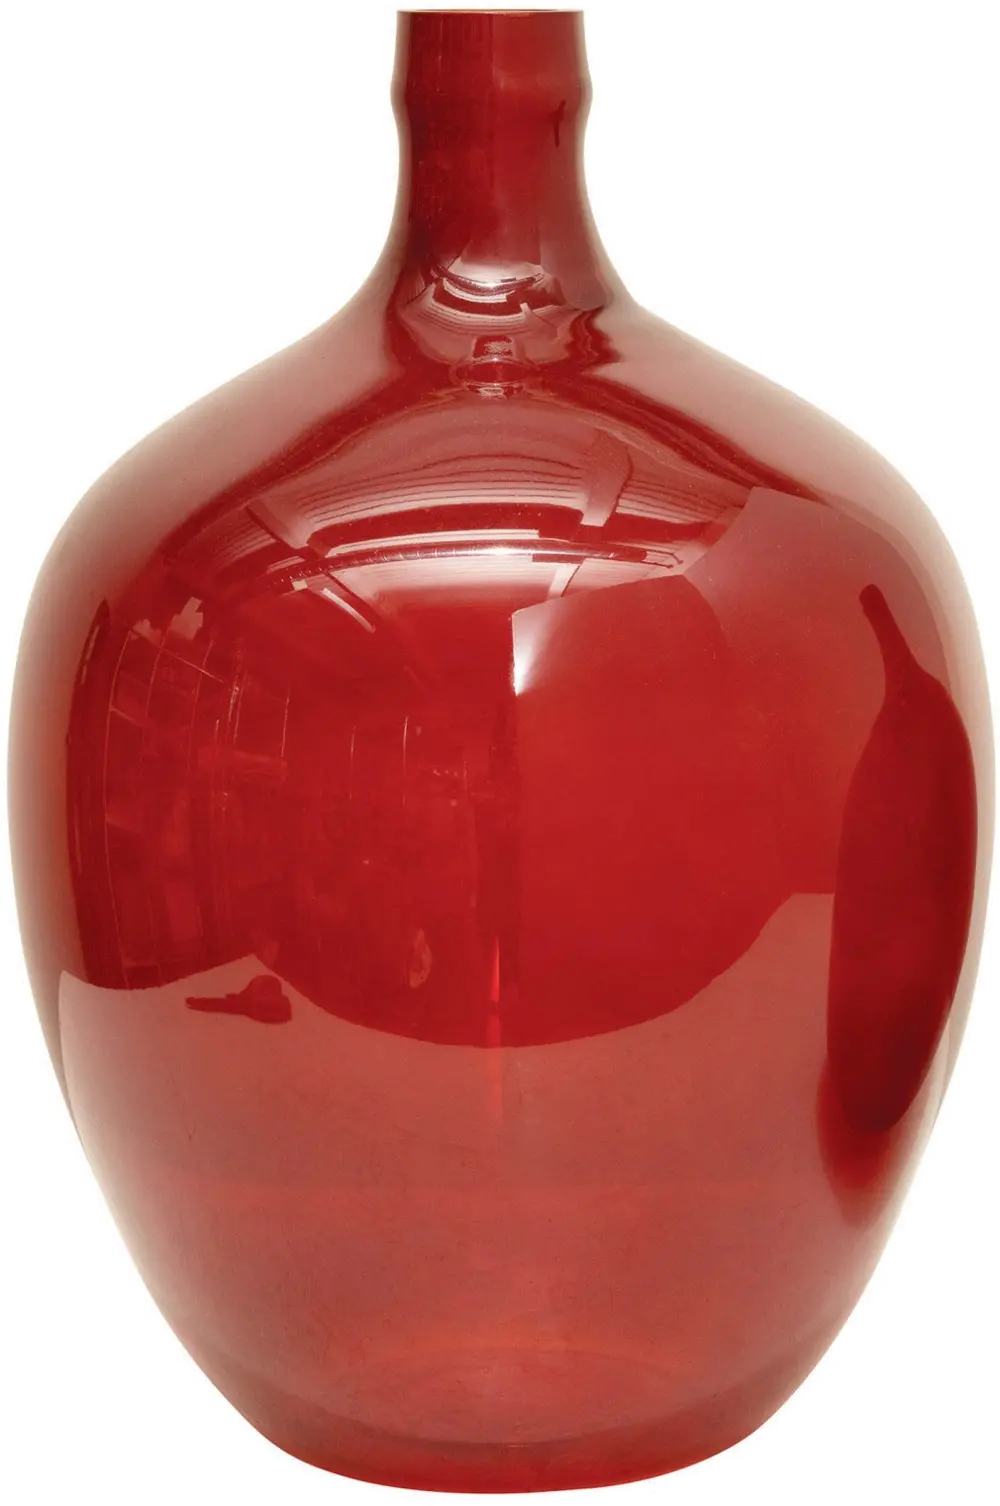 XM7257-RED/BOTTLE 15 Inch Red Glass Bottle-1